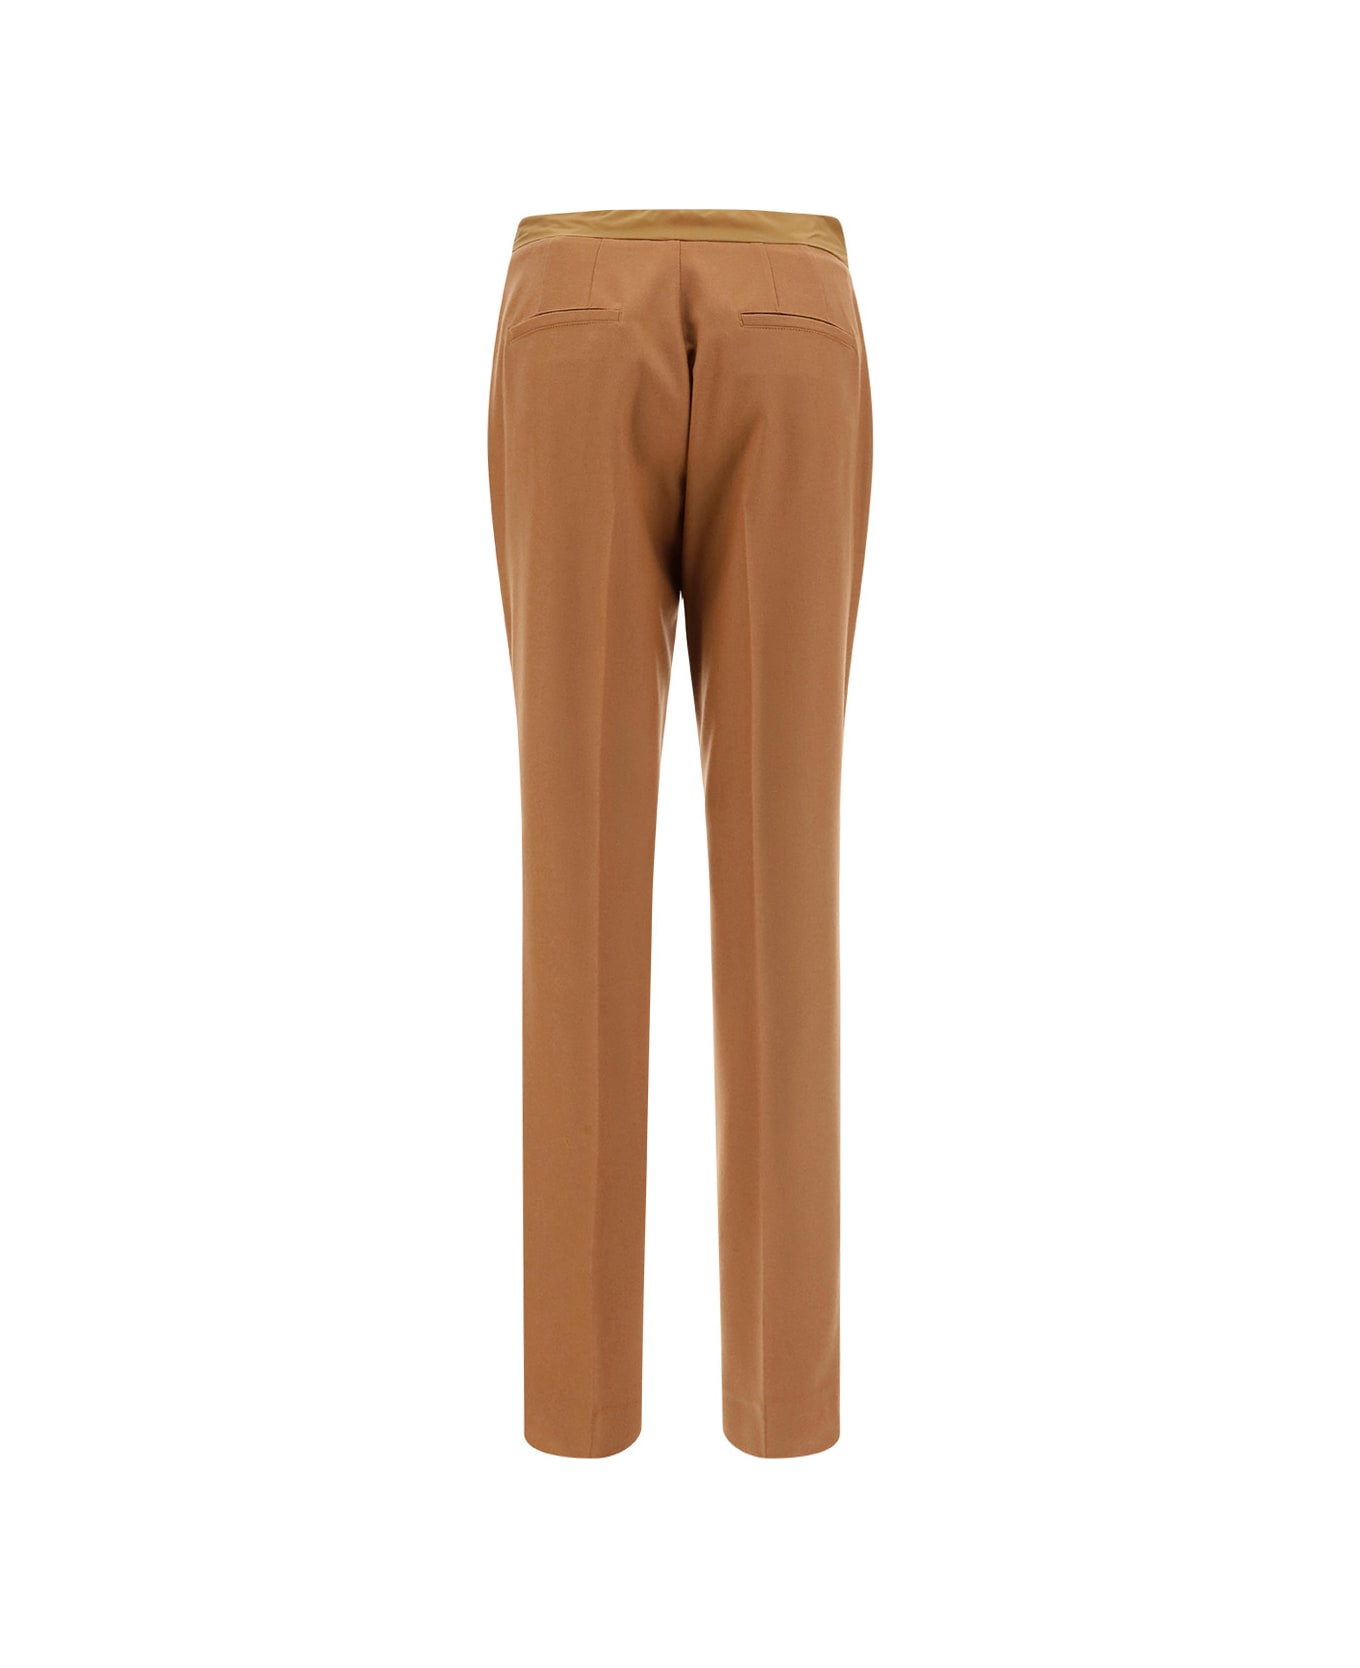 Moncler Great Trousers - Camel